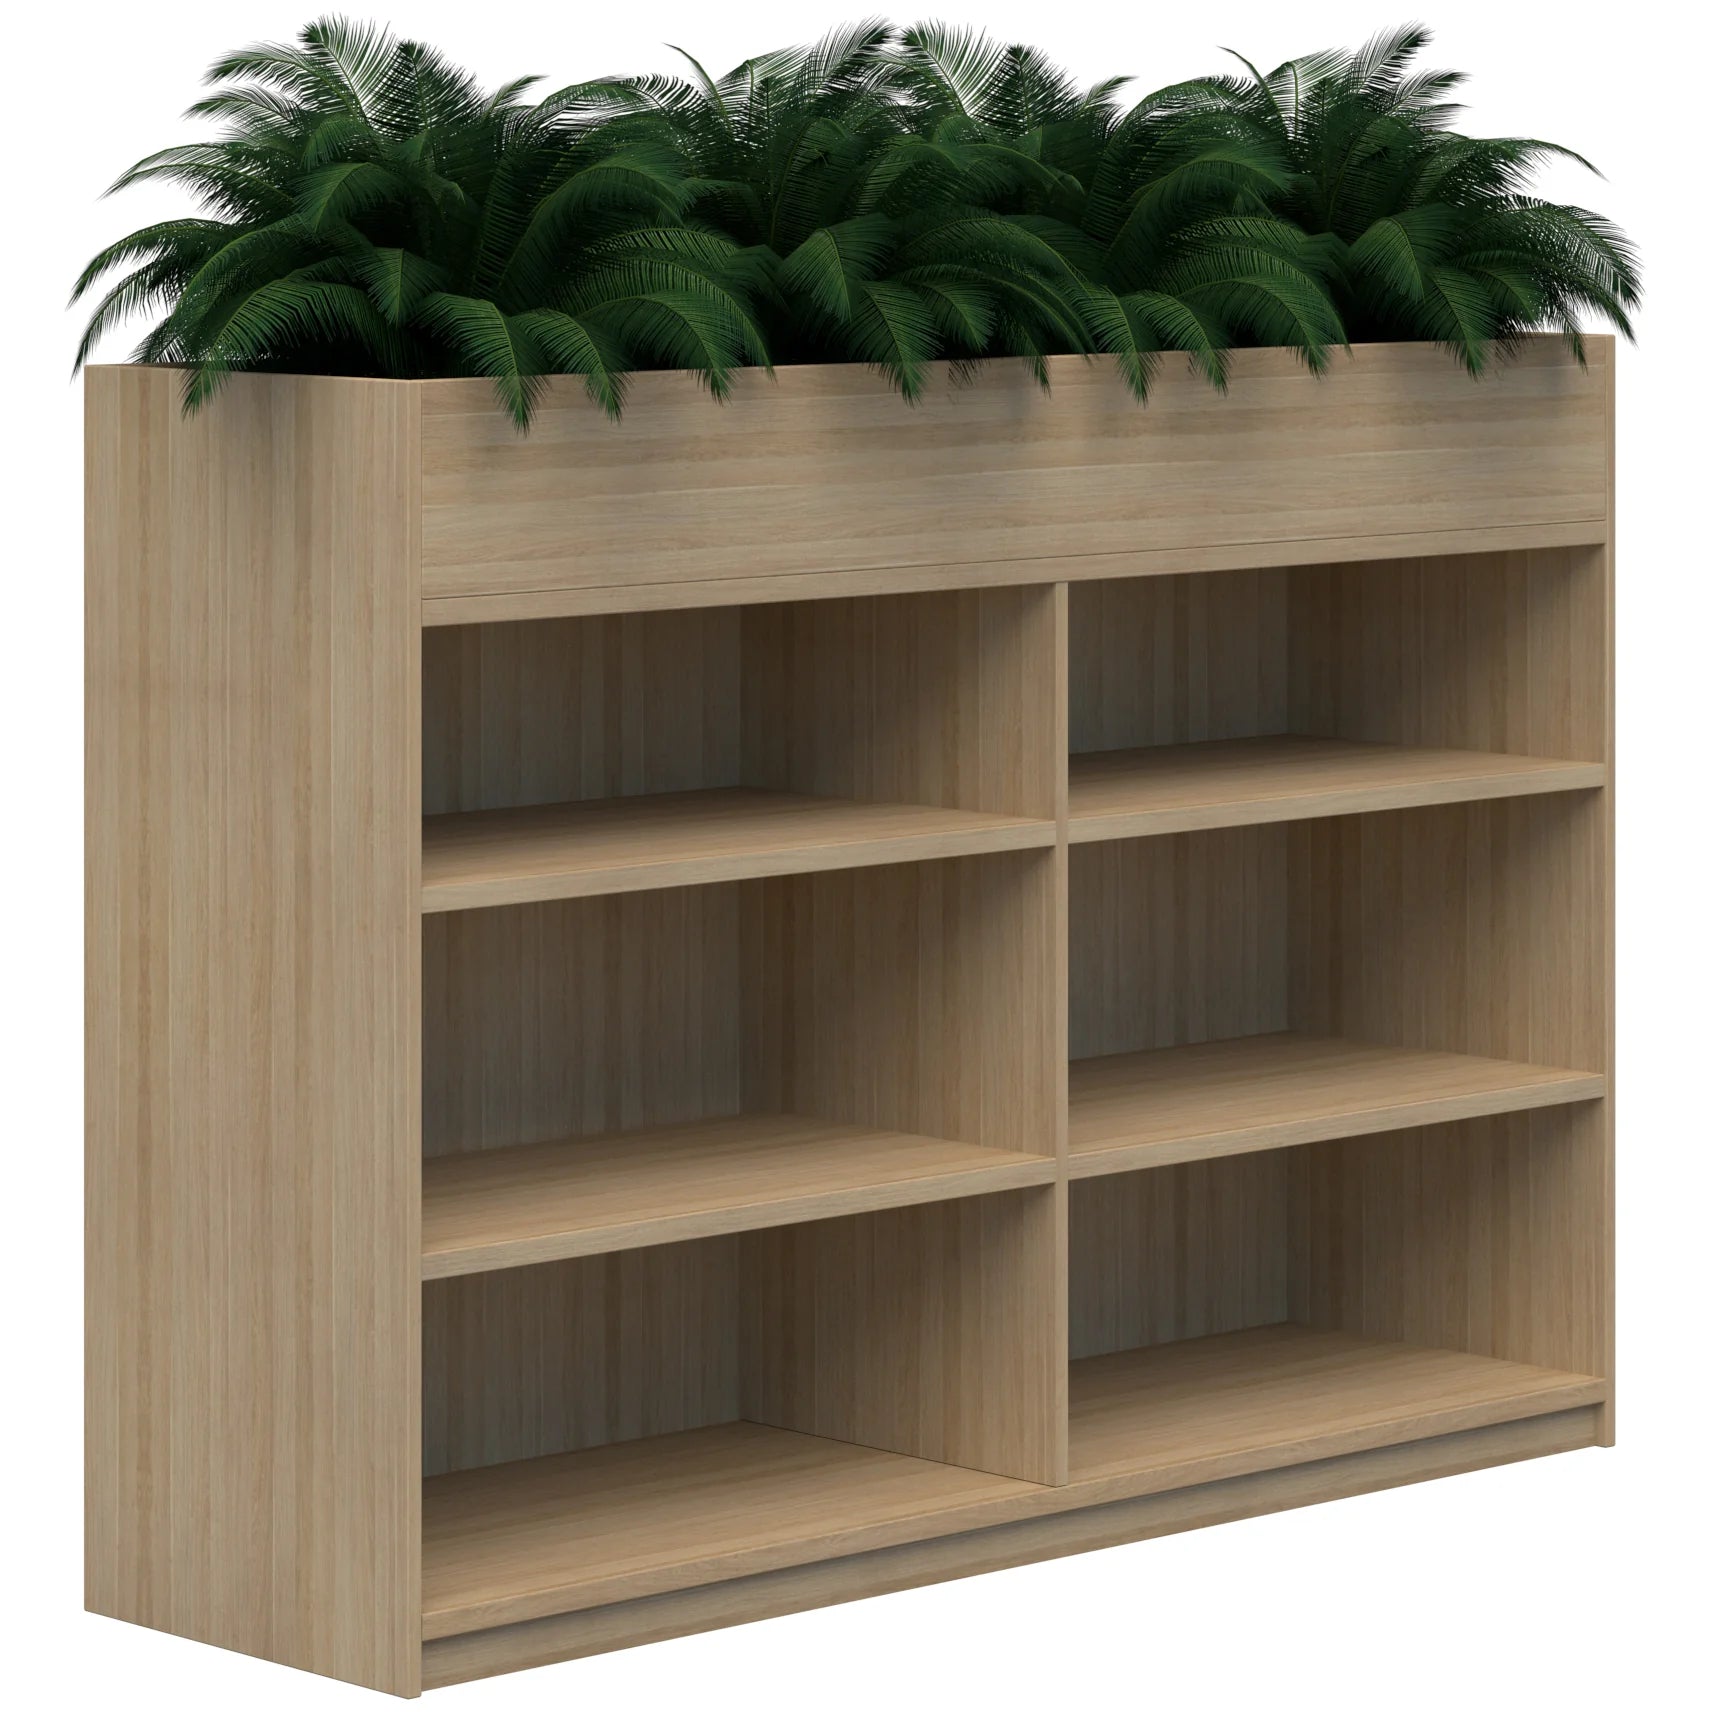 Dual three tier bookcase with built in planter box on top in classic oak colour.